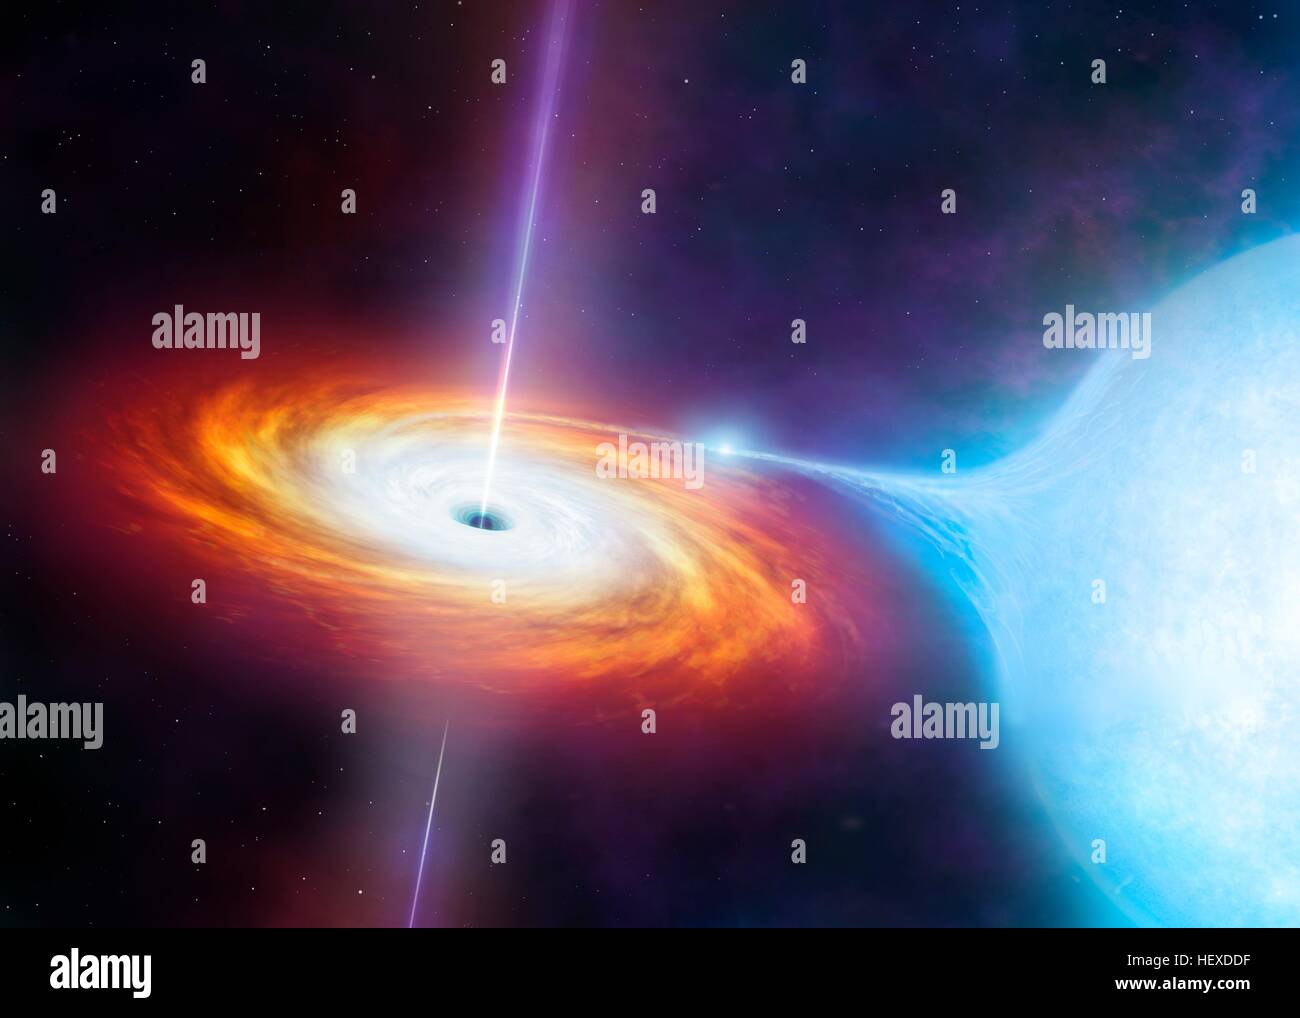 Artist's impression of an X-ray binary. These binary star systems comprise a compact star (black hole or neutron star) which is in orbit about a larger companion (in this case, a blue giant). The compact star distorts the companion and pulls gas from its atmosphere. The gas swirls around the compact object forming an accretion disc. Particle jets are sometimes emitted from the centre of this disc, making the systems superficially similar to the much larger and totally different quasars. Stock Photo